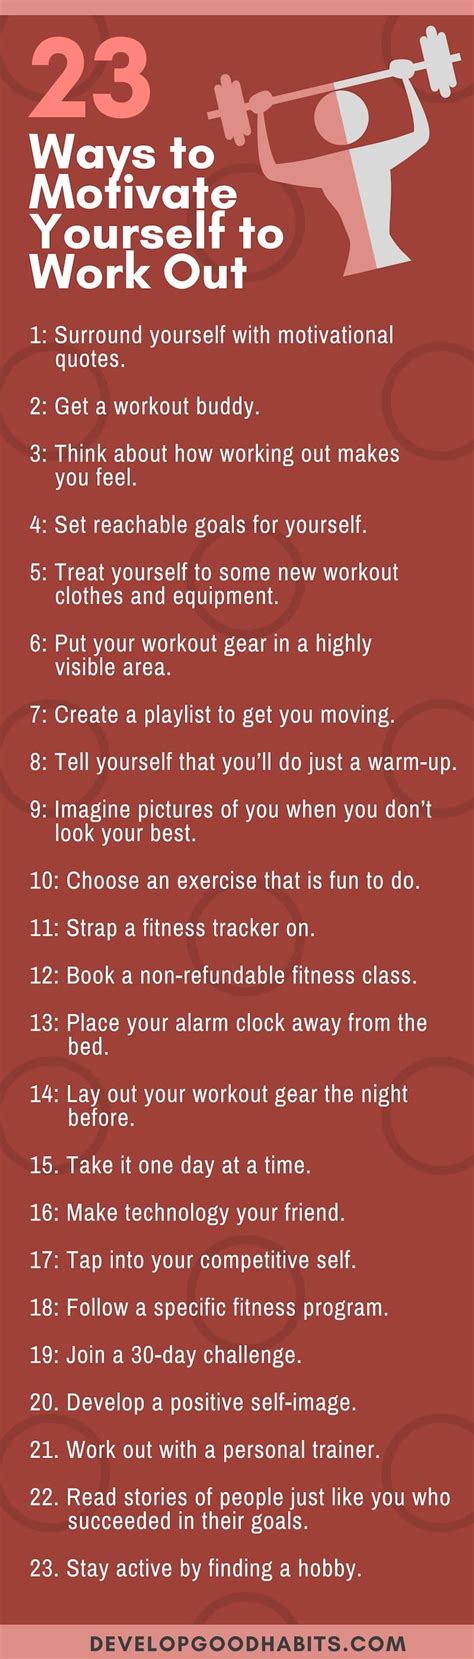 23 ways to motivate yourself to work out fitness jobs motivation health and fitness tips